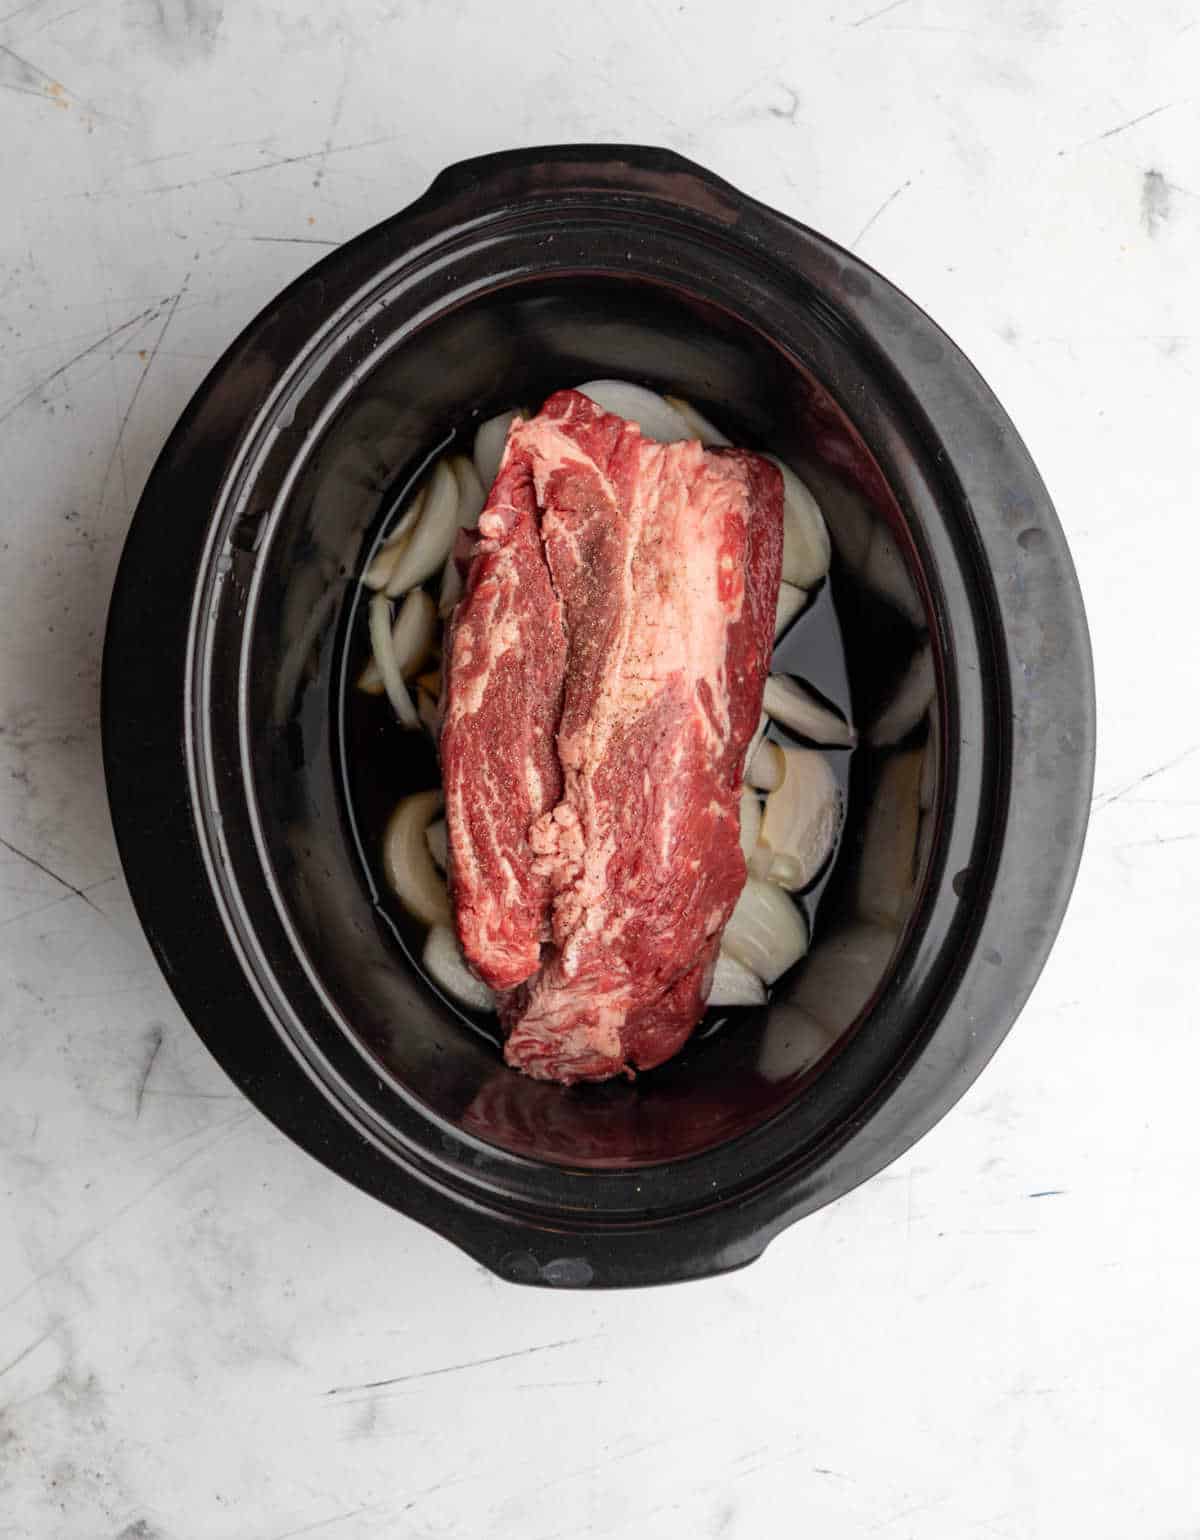 Beef broth poured around a chuck roast in a crock pot. 